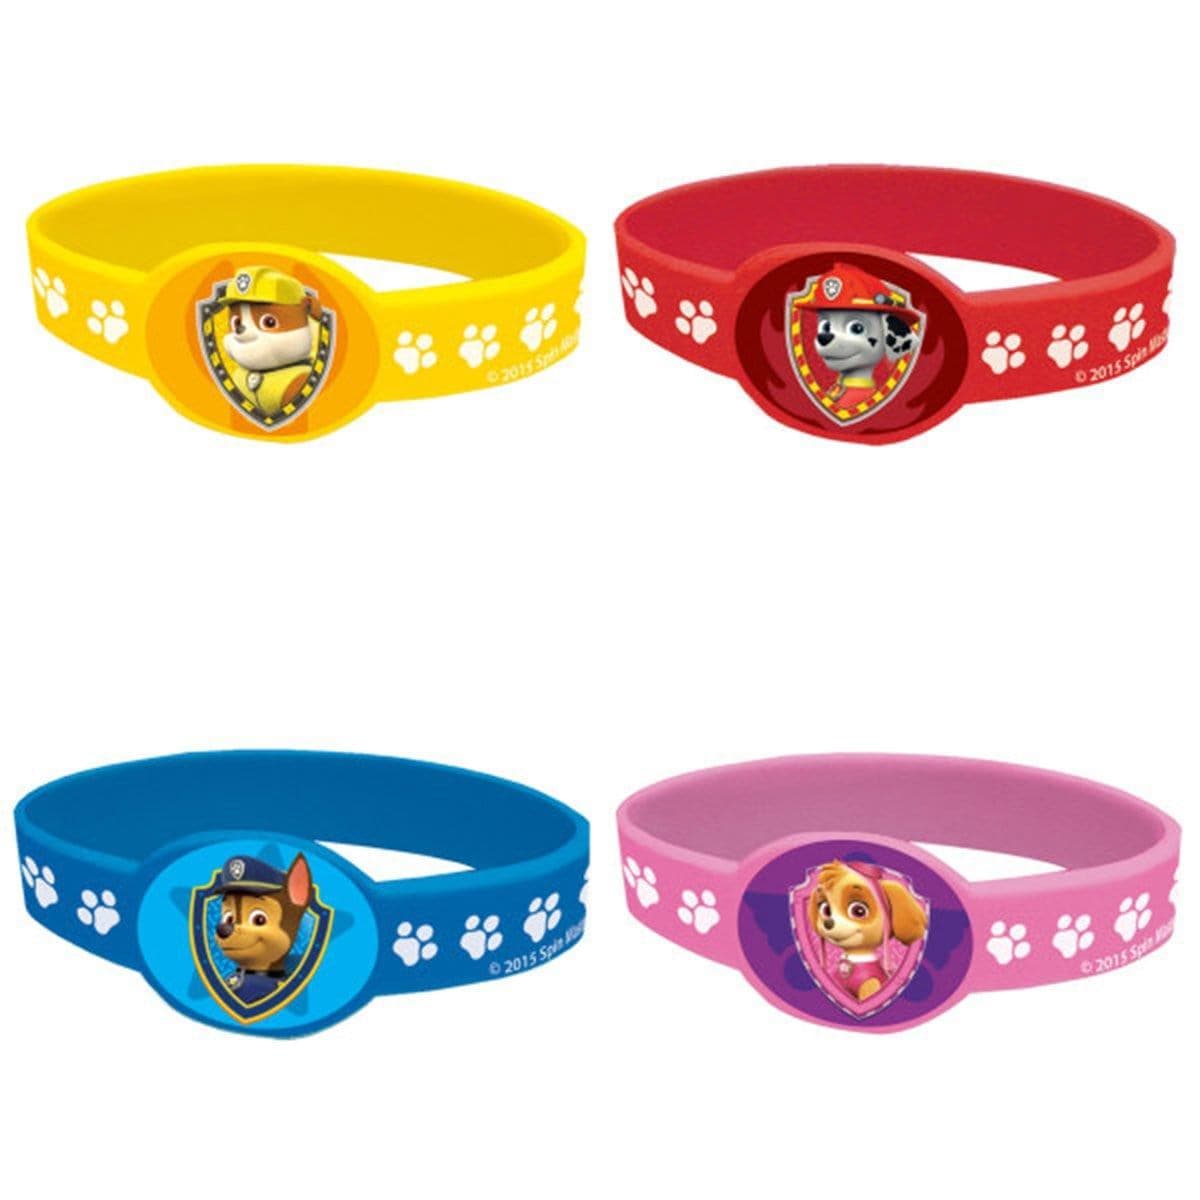 Buy Kids Birthday Paw Patrol rubber bracelets, 4 per package sold at Party Expert